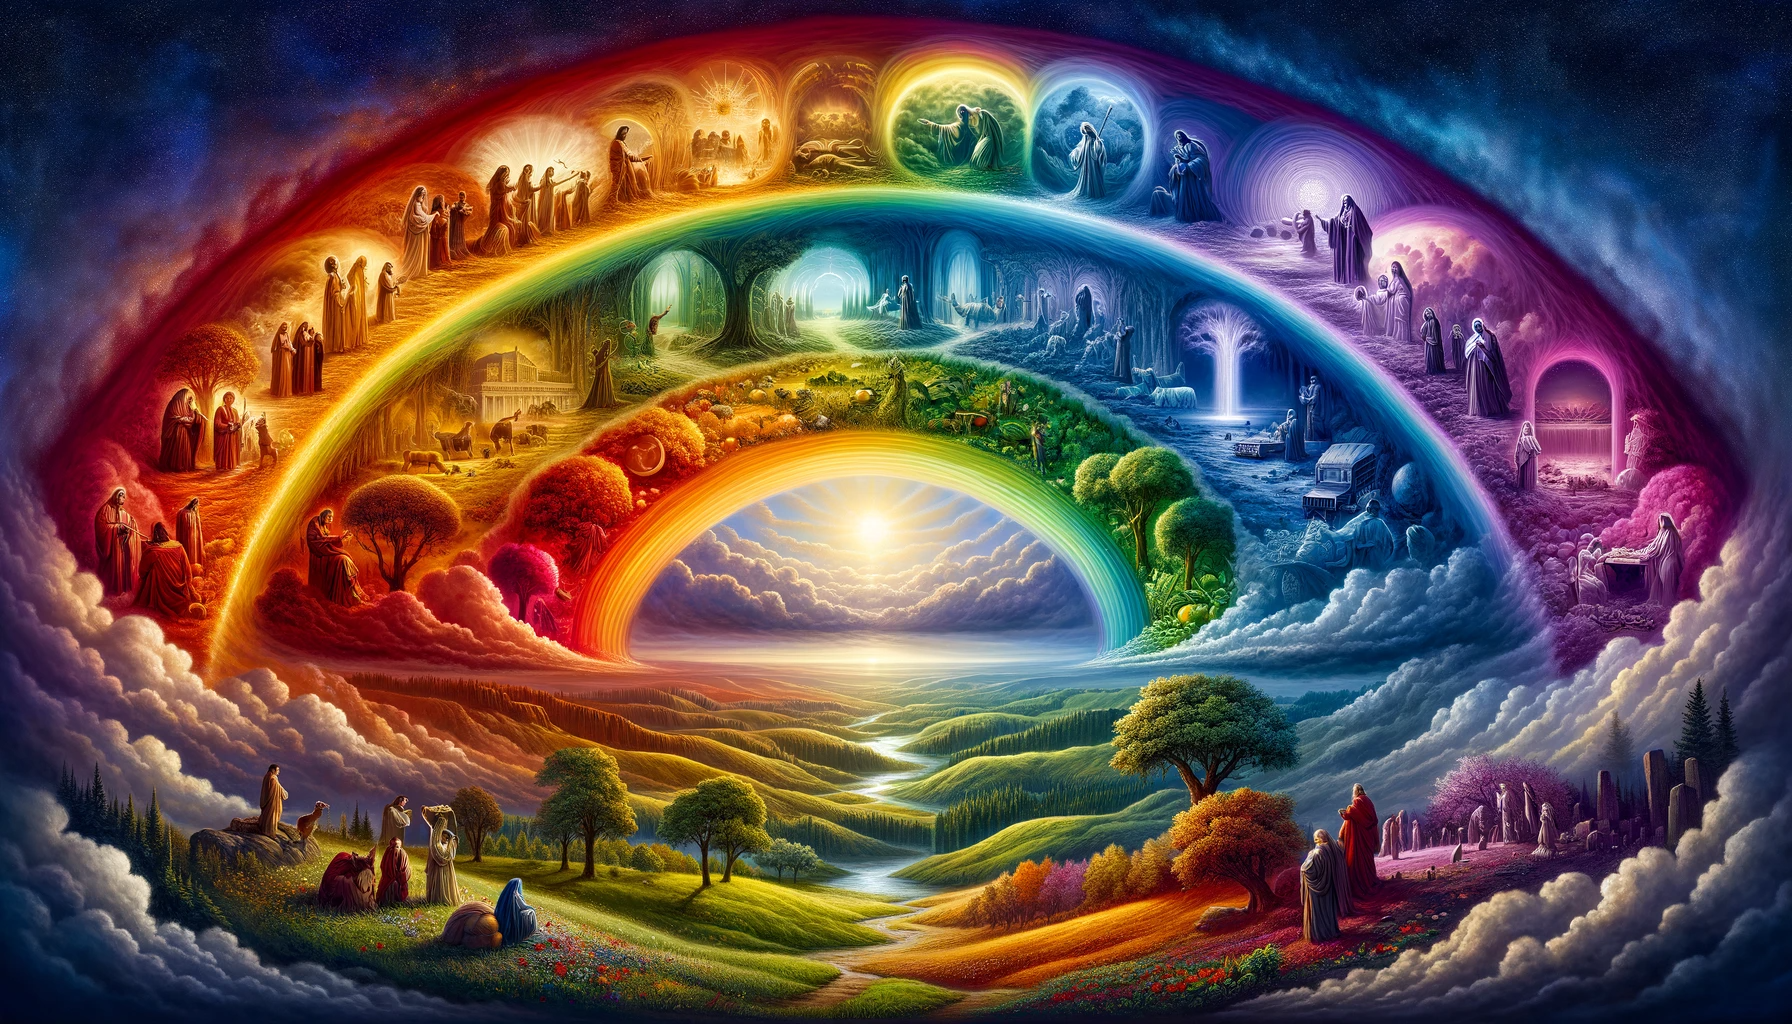 Biblical significance of rainbow colours